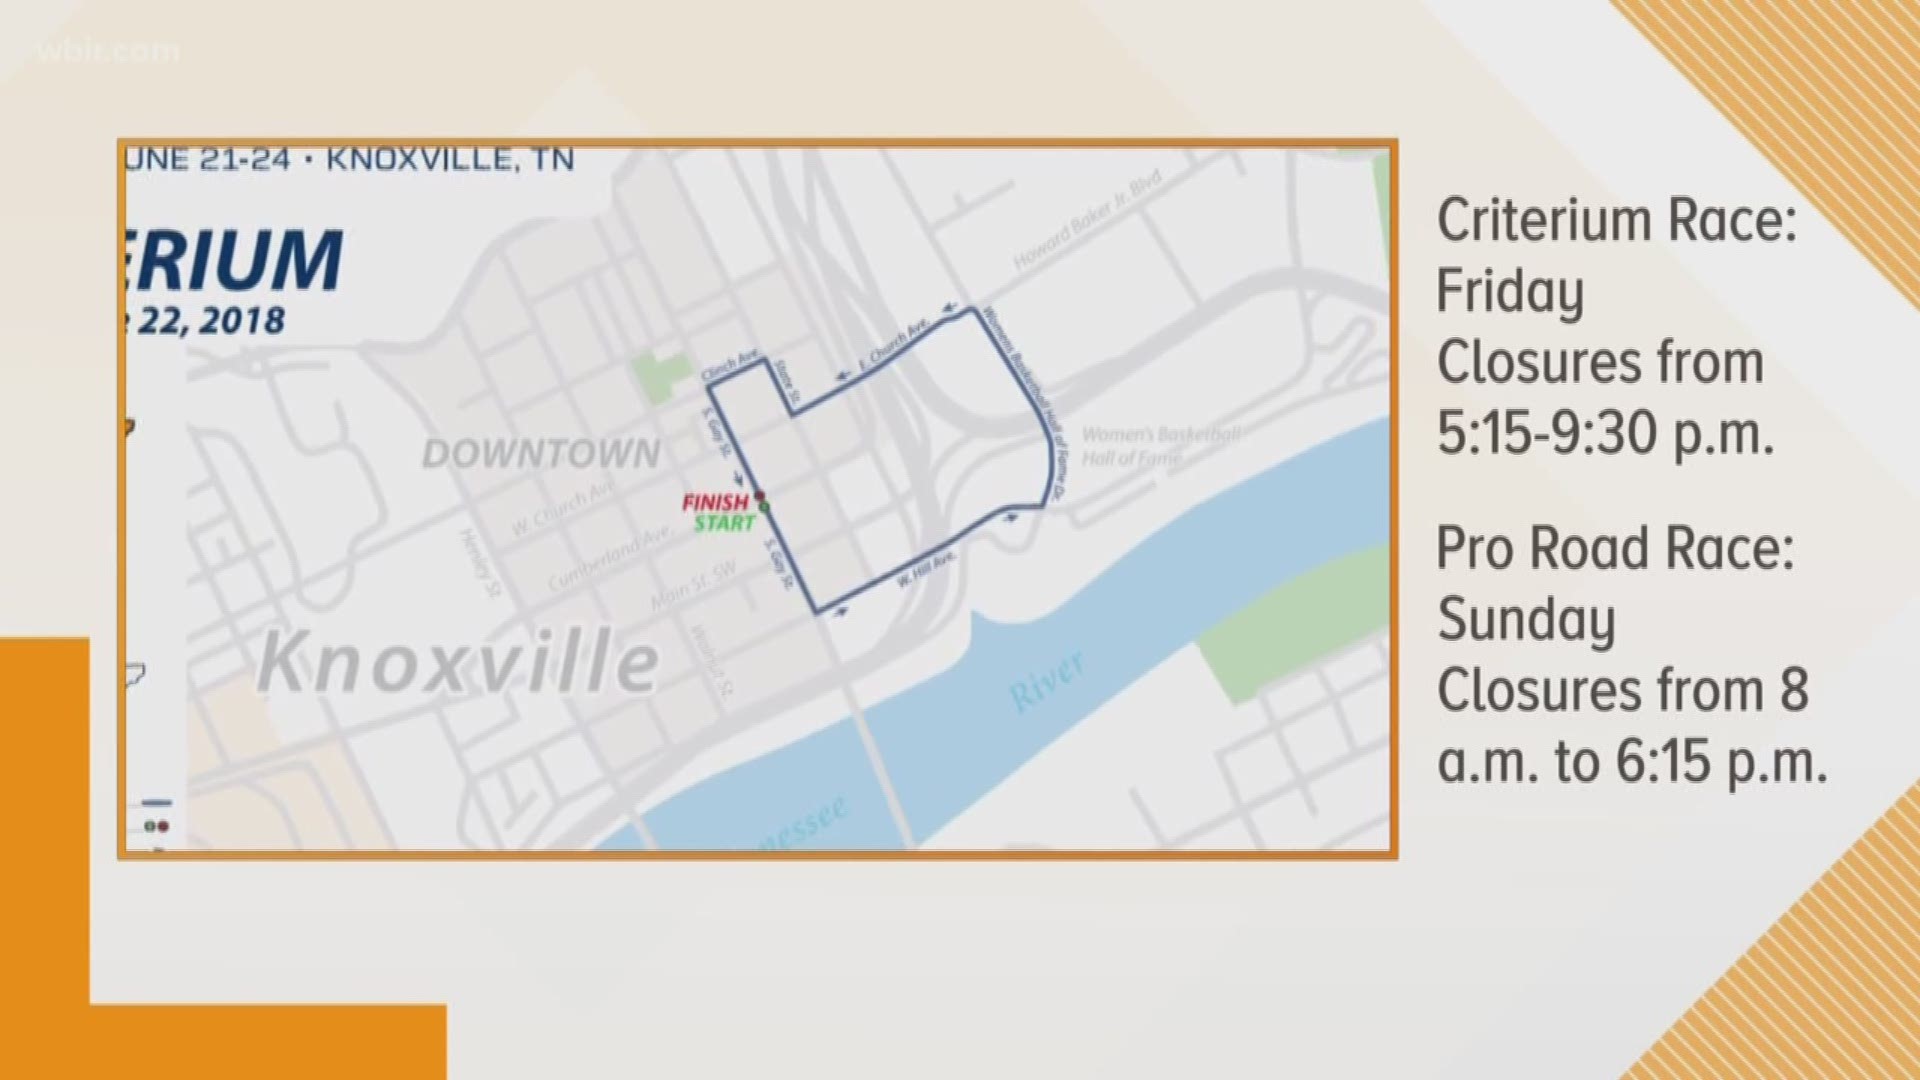 The national cycling event will see a few streets closed on Friday and Sunday.